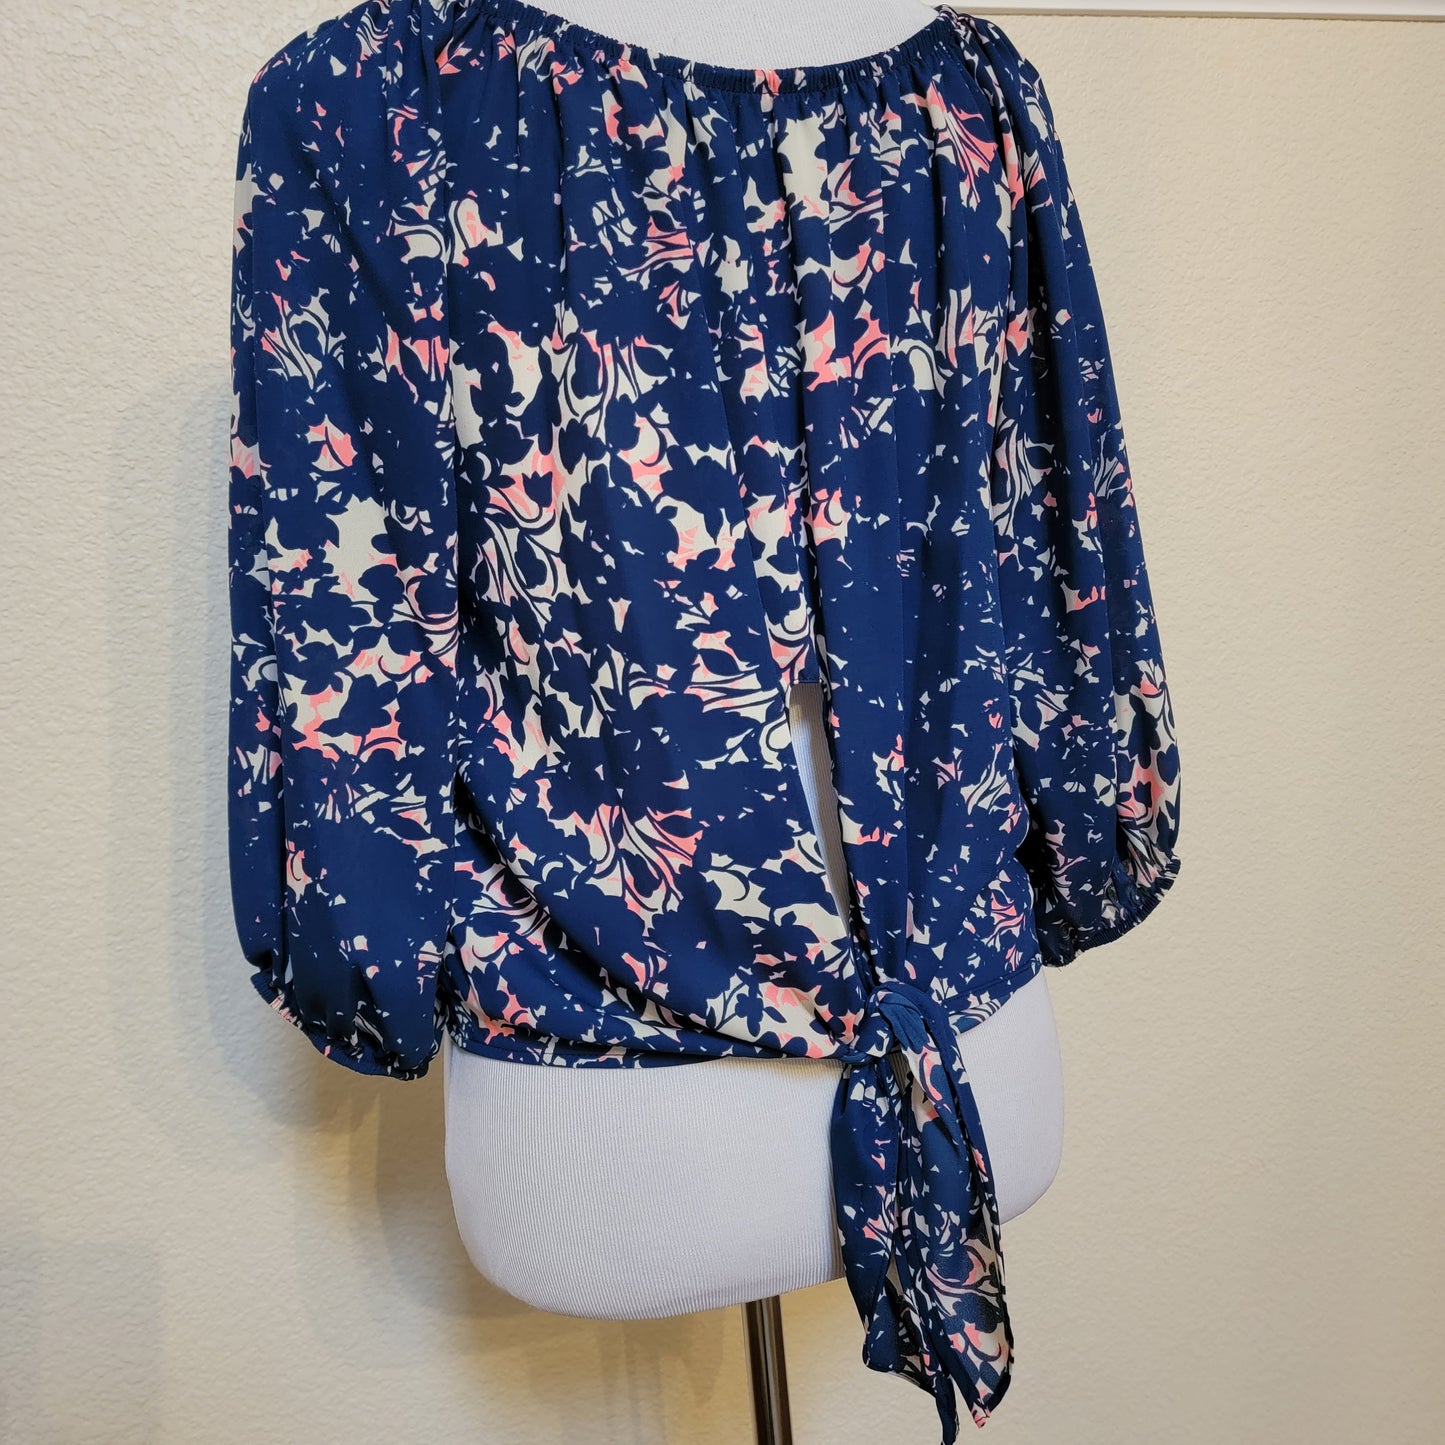 Floral Print Abstract Top w/tie back